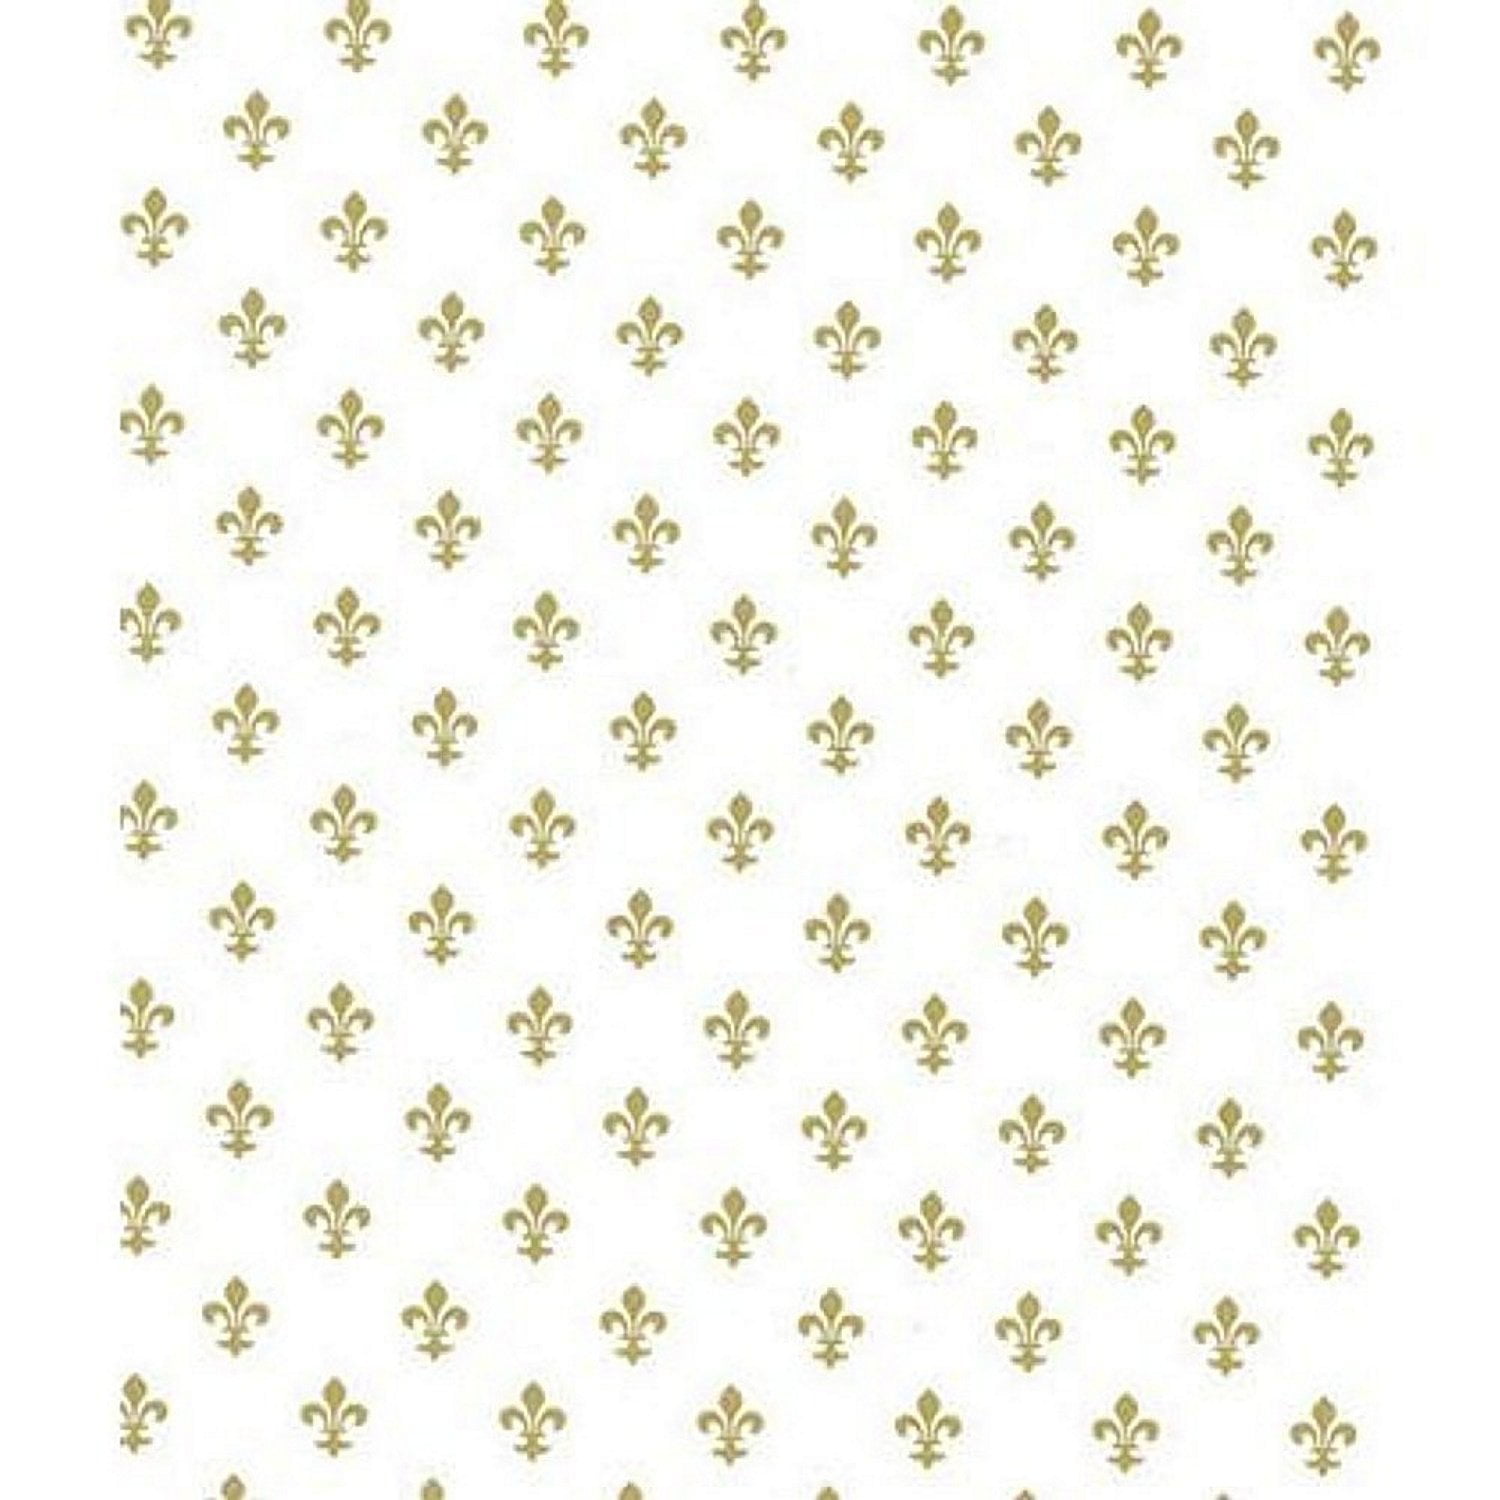 White & Gold FLEUR DE LIS Floral Tissue Paper for Gift Wrapping 15"x20" Sheets 